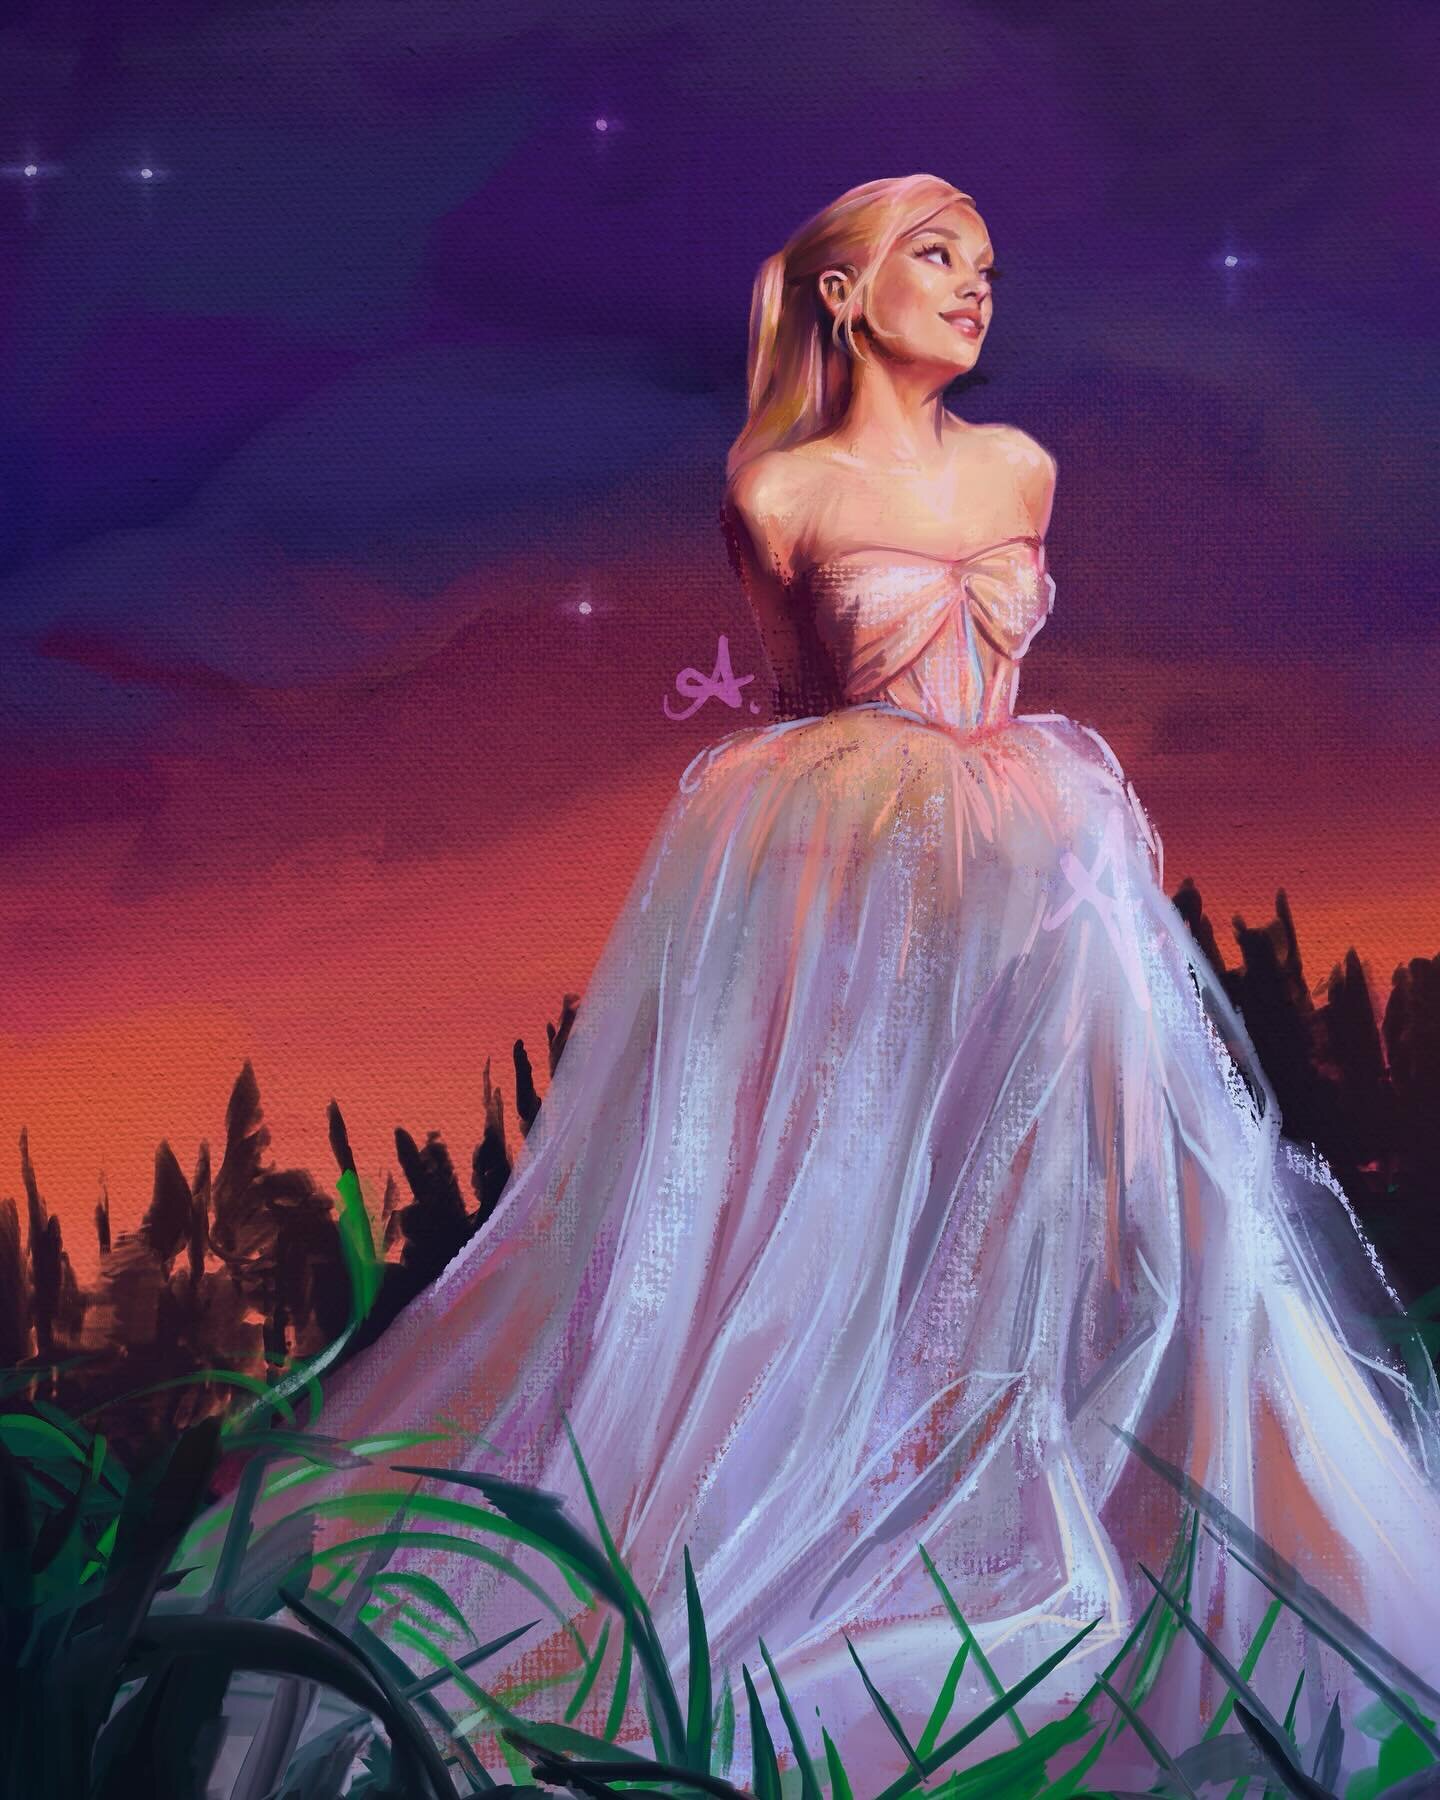 🫧 swipe for process, full piece/details and a peek at the ref

painted in @procreate with brushes by @maxulichney 

took a lil break from client work (i&rsquo;ve been busy y&rsquo;all!!) to paint a study of miss @arianagrande from her performance of